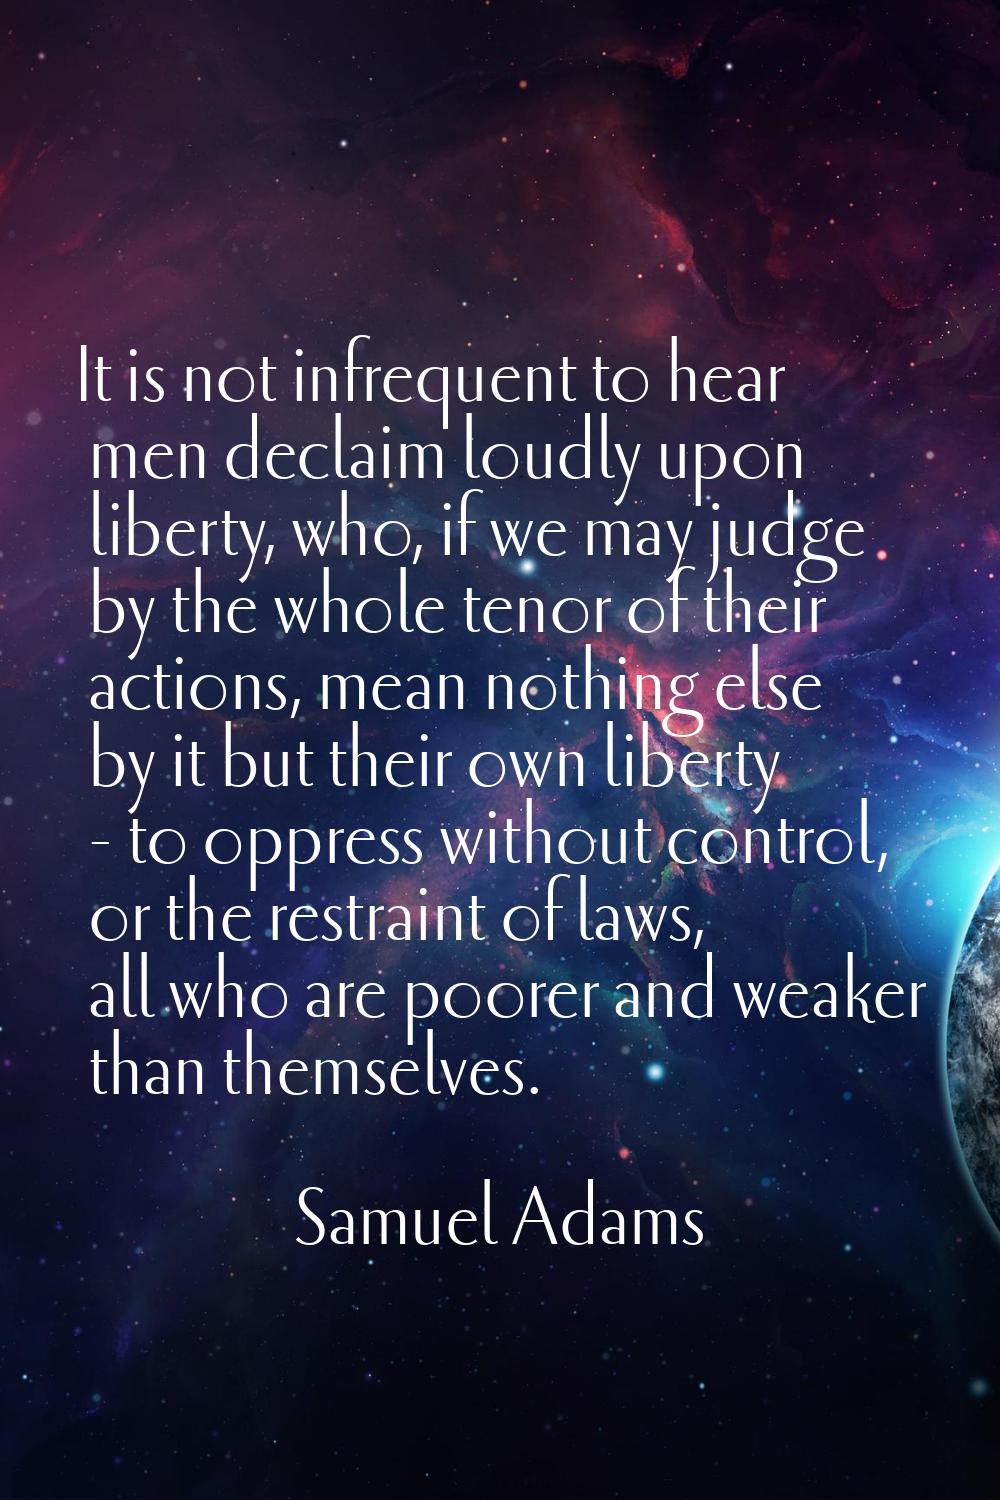 It is not infrequent to hear men declaim loudly upon liberty, who, if we may judge by the whole ten